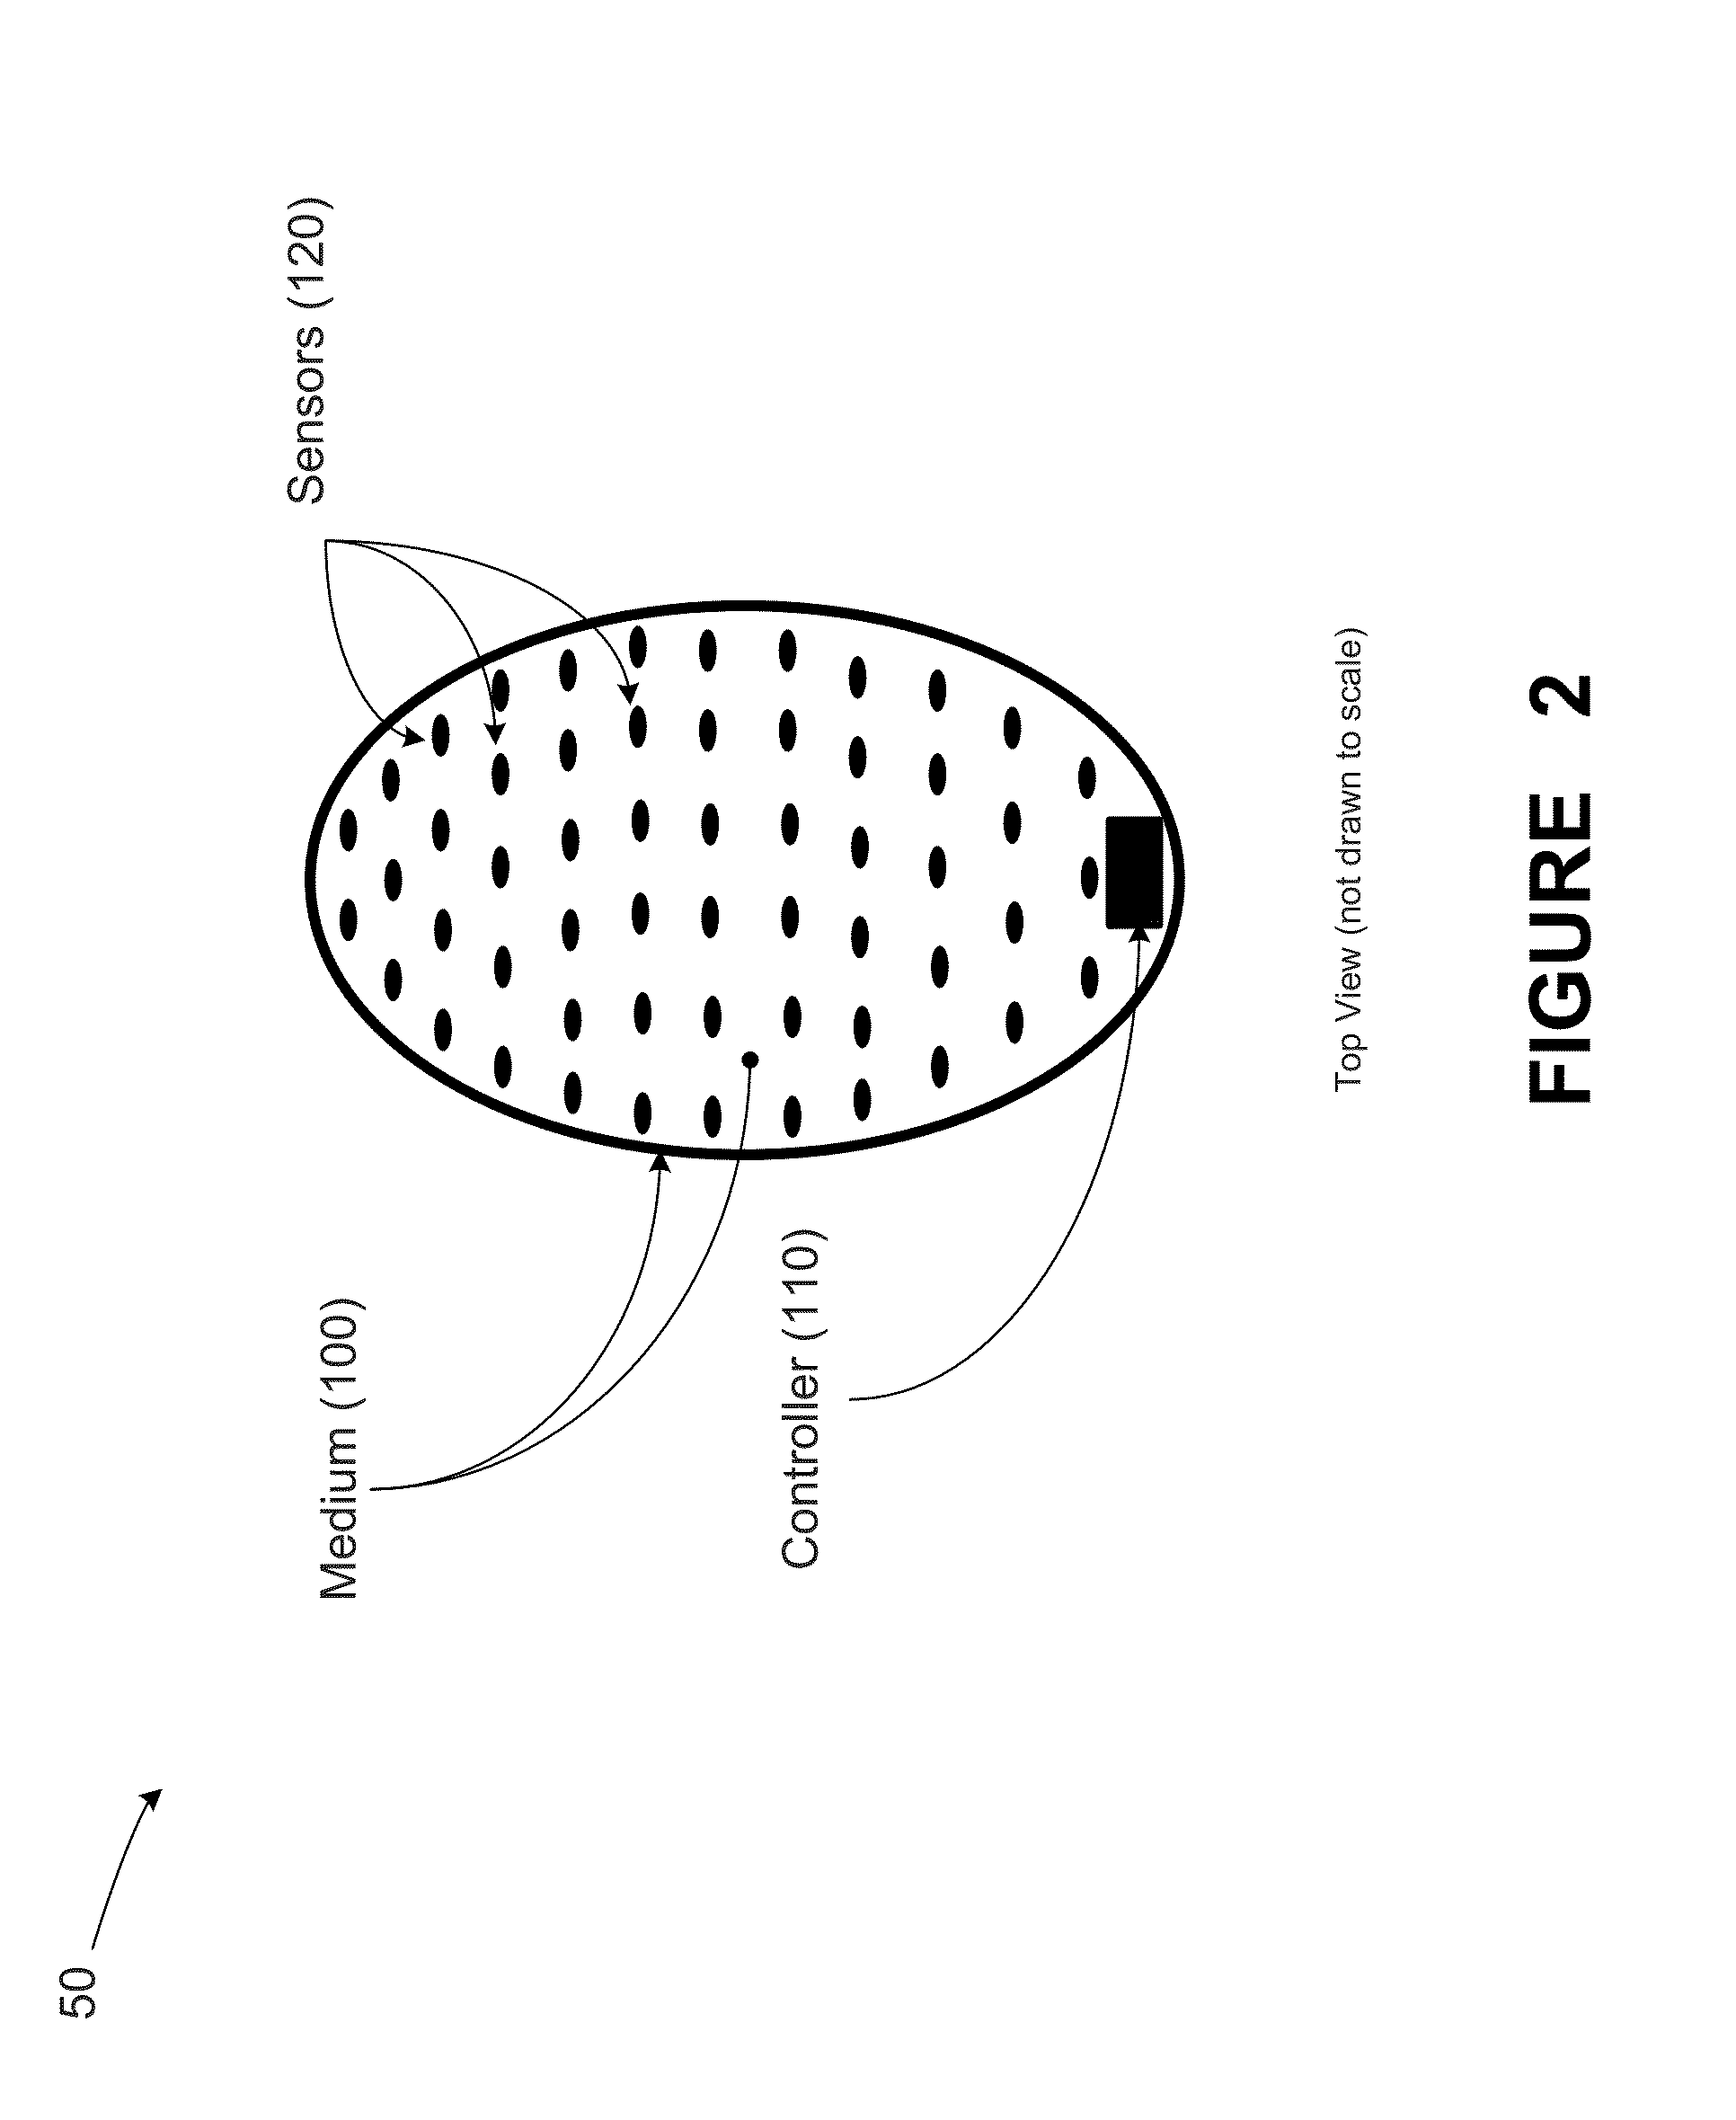 Method, apparatus and system for determining a health risk using a wearable housing for sensors